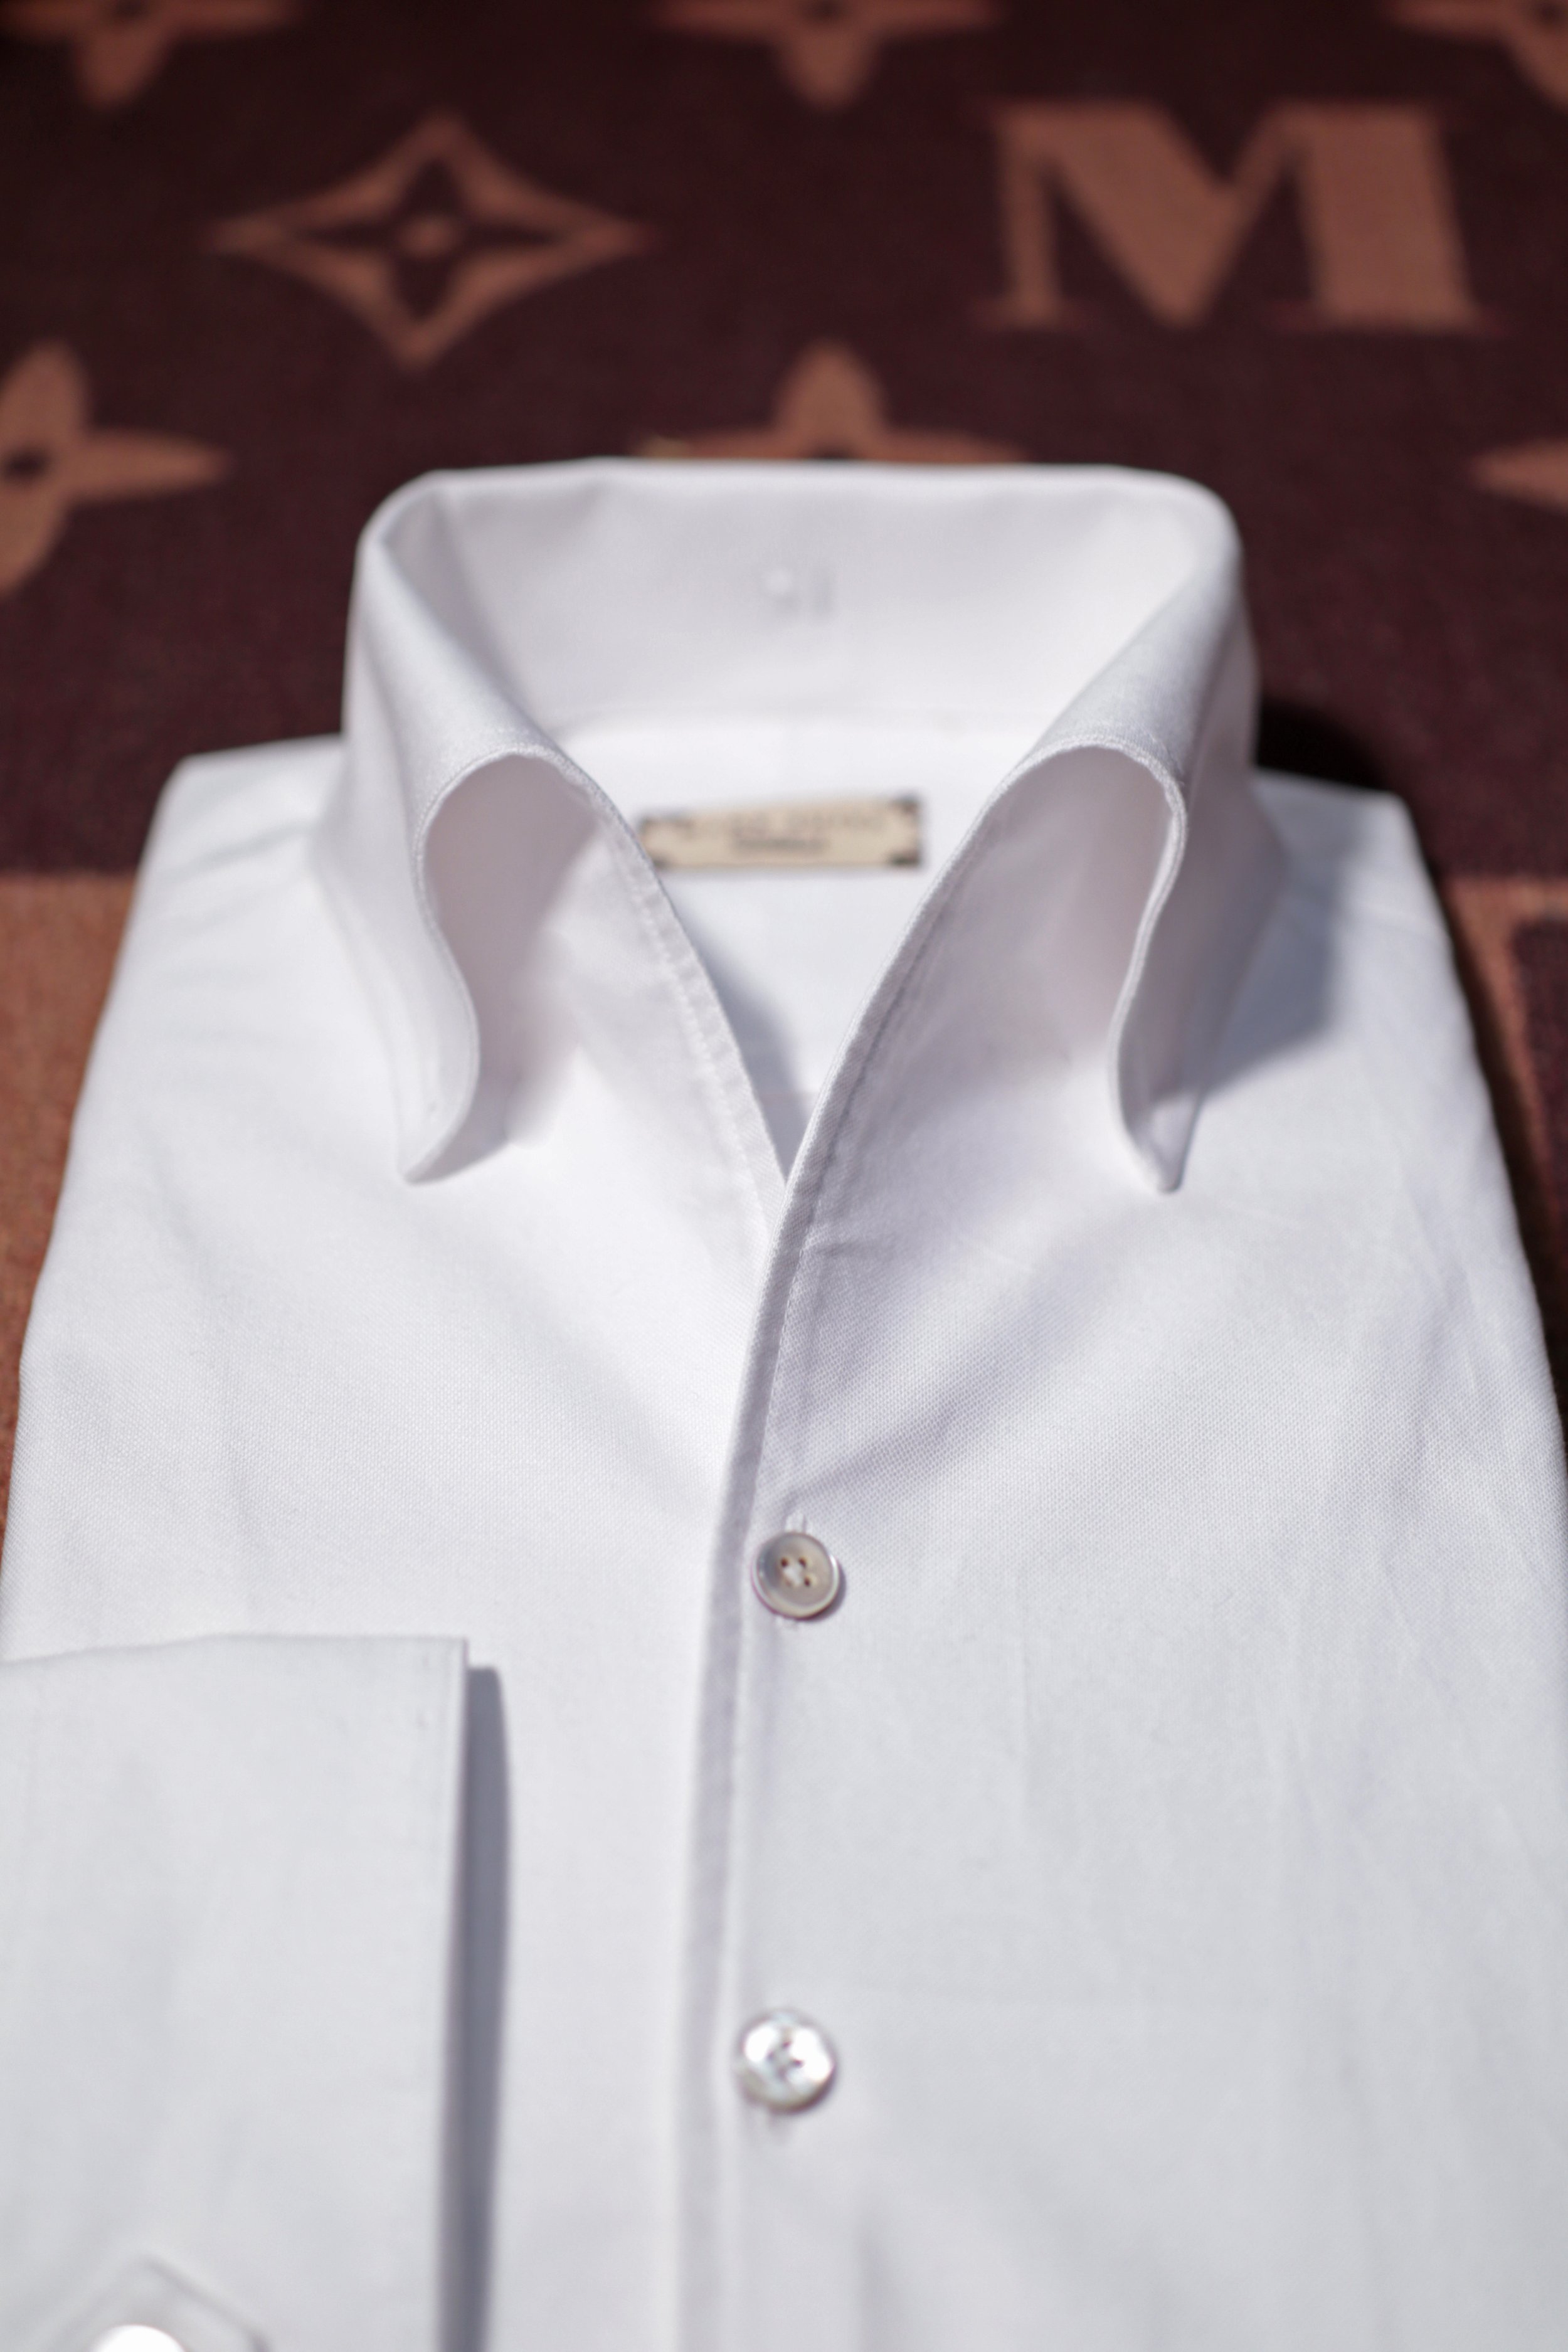 Focus Collar White Oxford Shirt One piece collar | made Suits signature cooper style | made in yippon.JPG